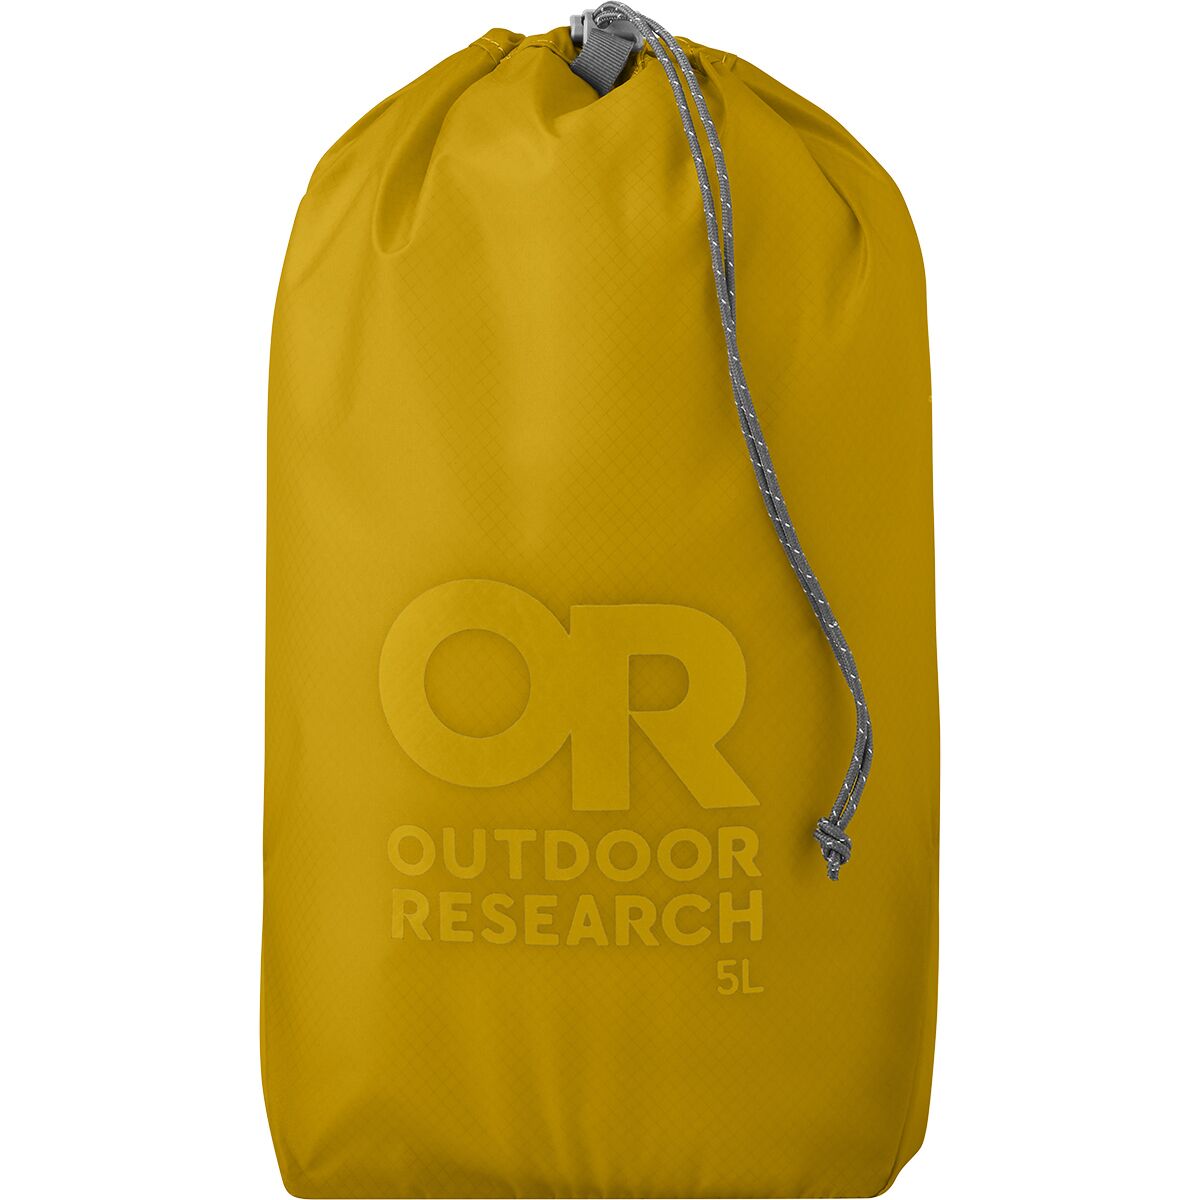 Outdoor Research PackOut Ultralight 5L Stuff Sack - Hike & Camp